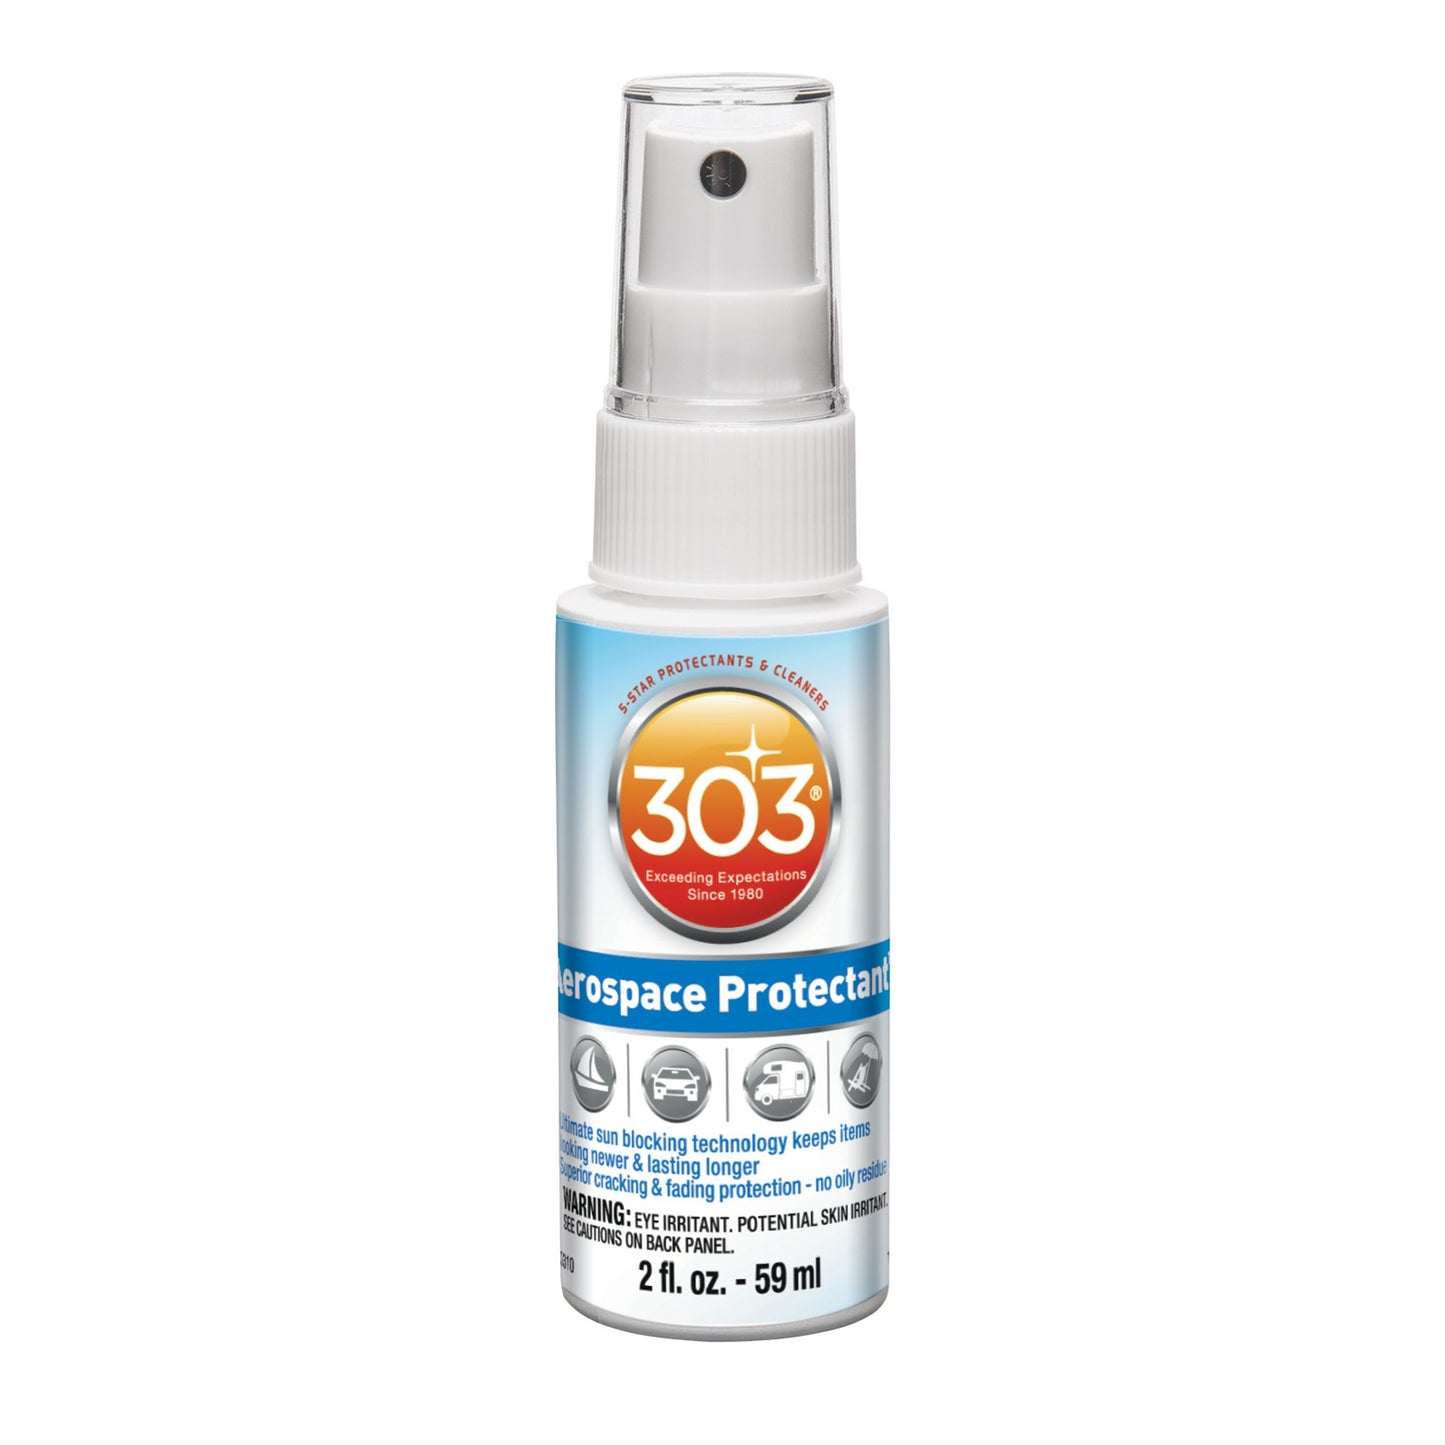 A bottle of 303 Protectant spray, designed to provide UV protection and prevent fading for materials including inflatable boats, 2 fl. oz size.